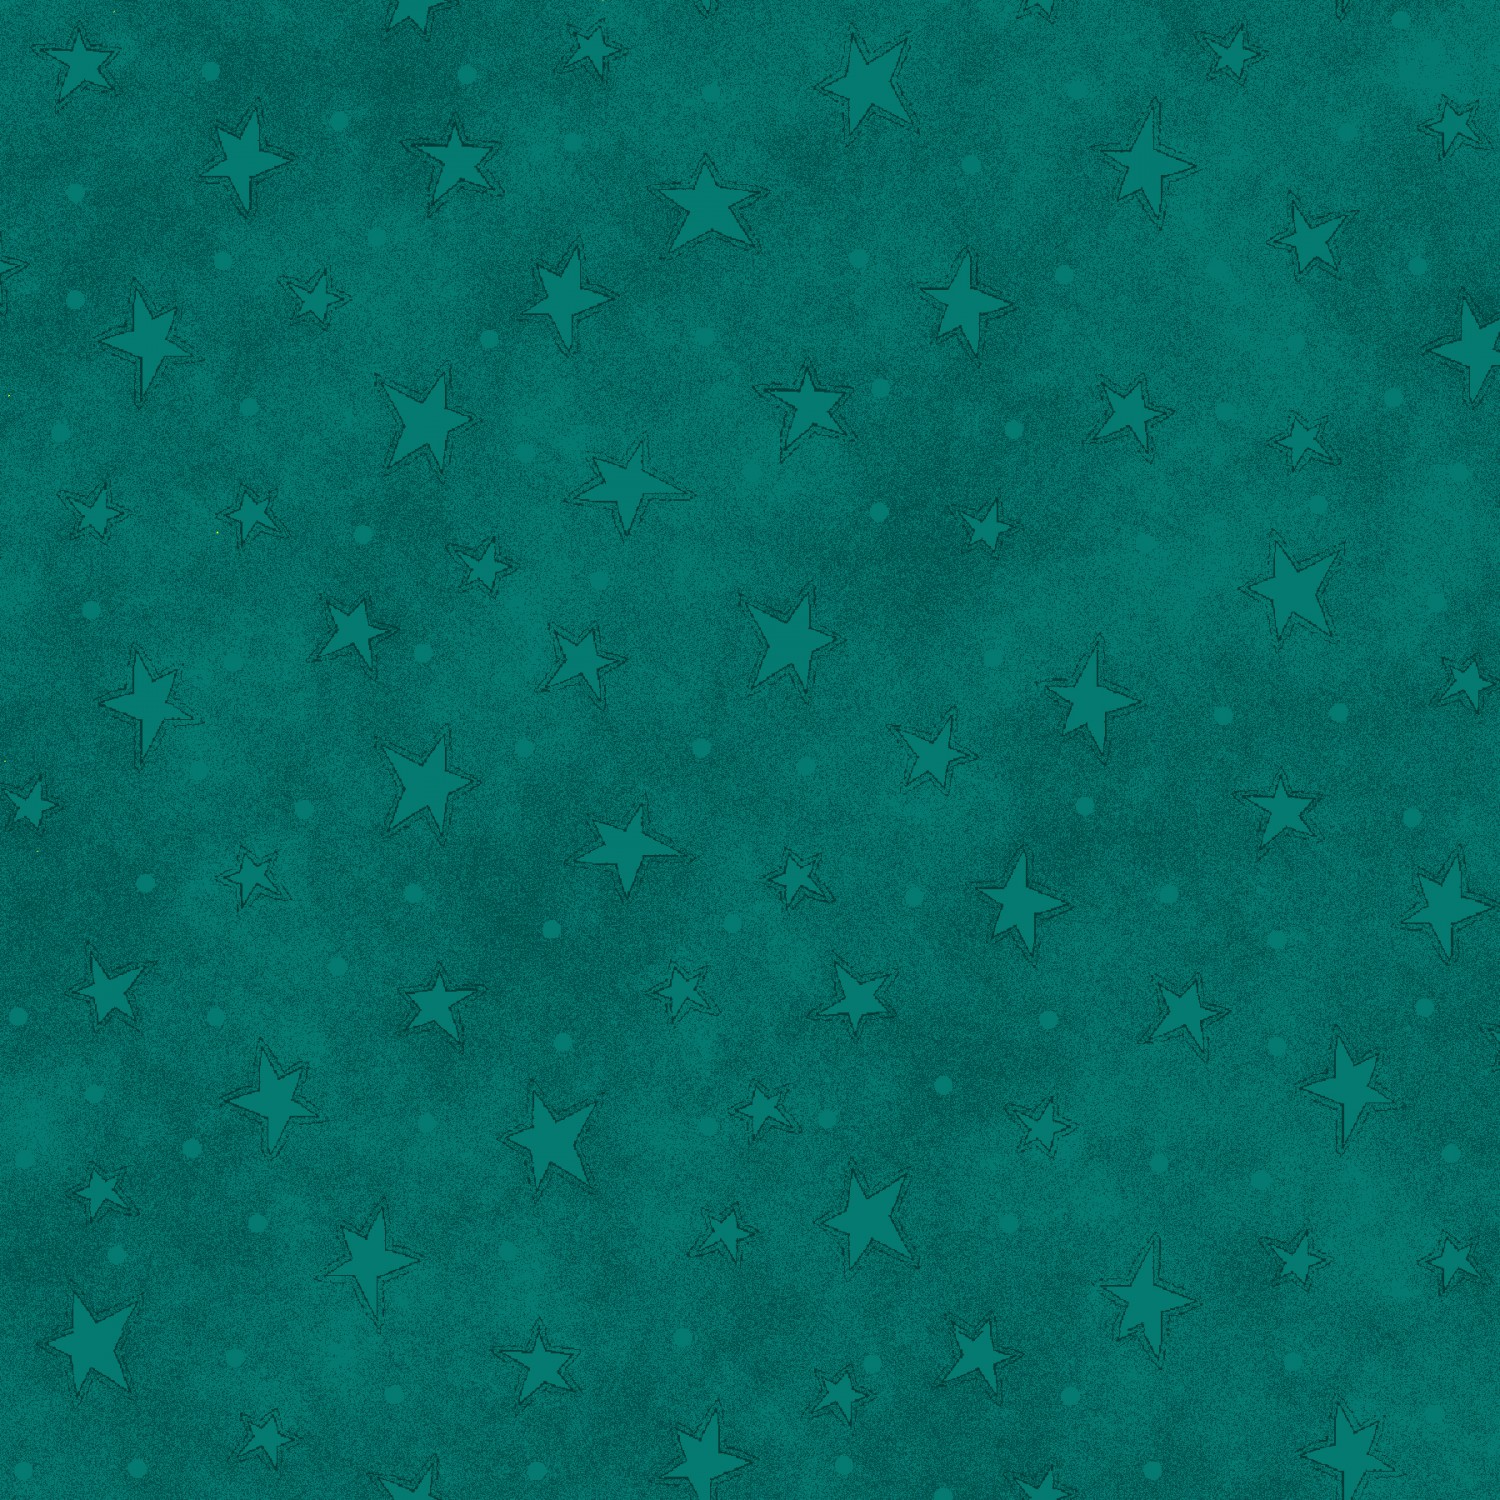 New Teal Starry Fabric